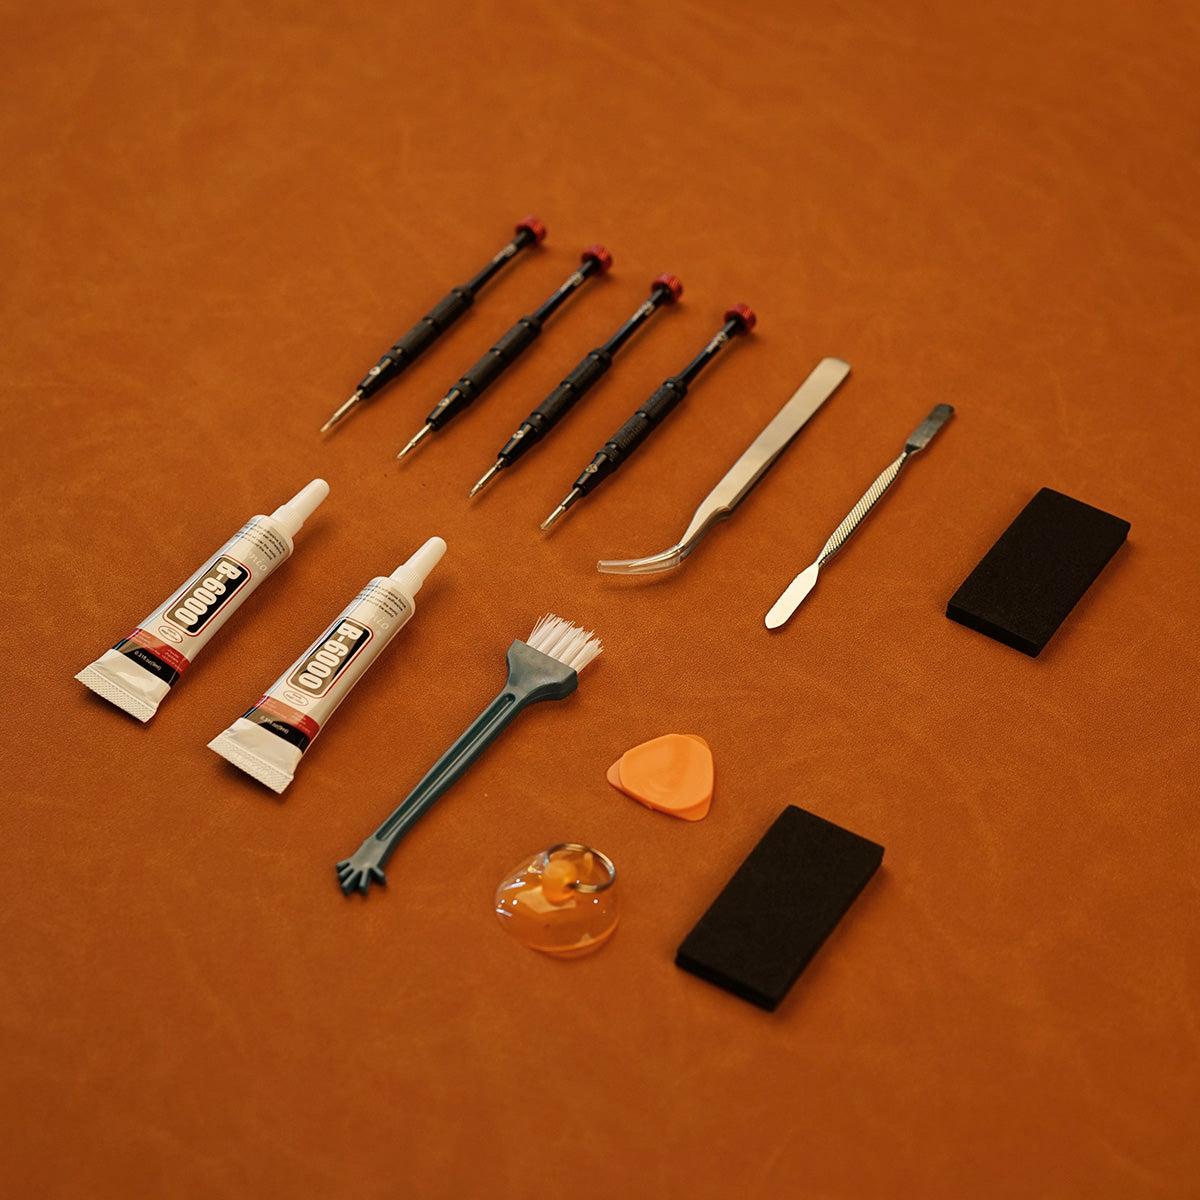 XreArt DIY Tool Kit iPhone X - The Usual